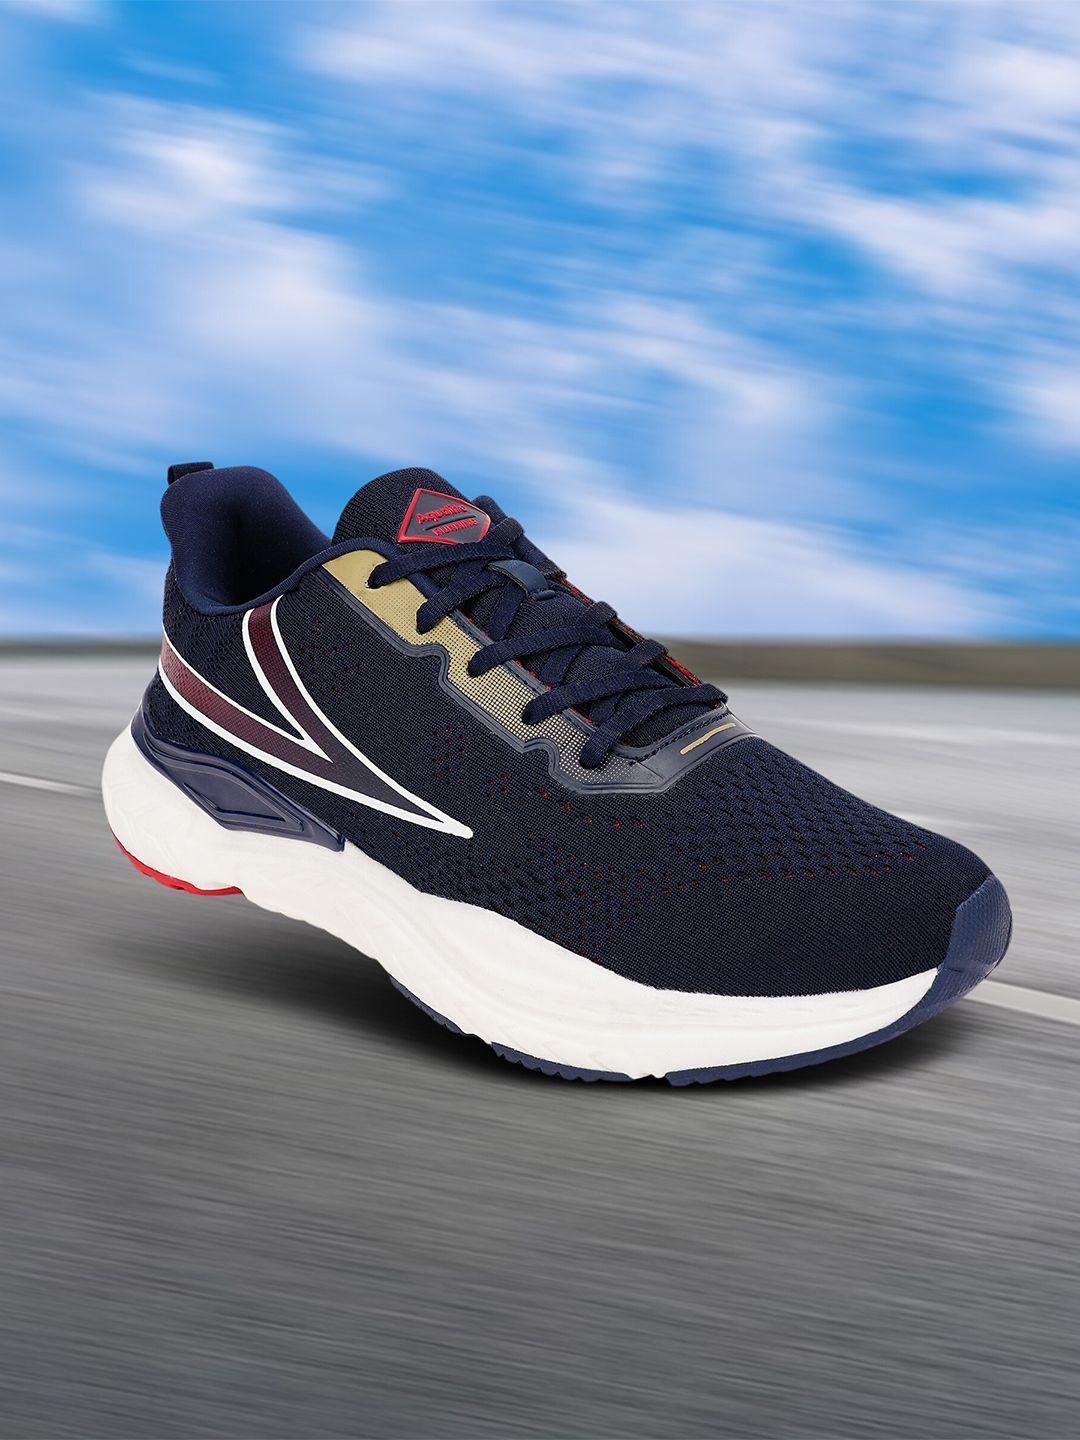 aqualite men mesh feather weight running shoes